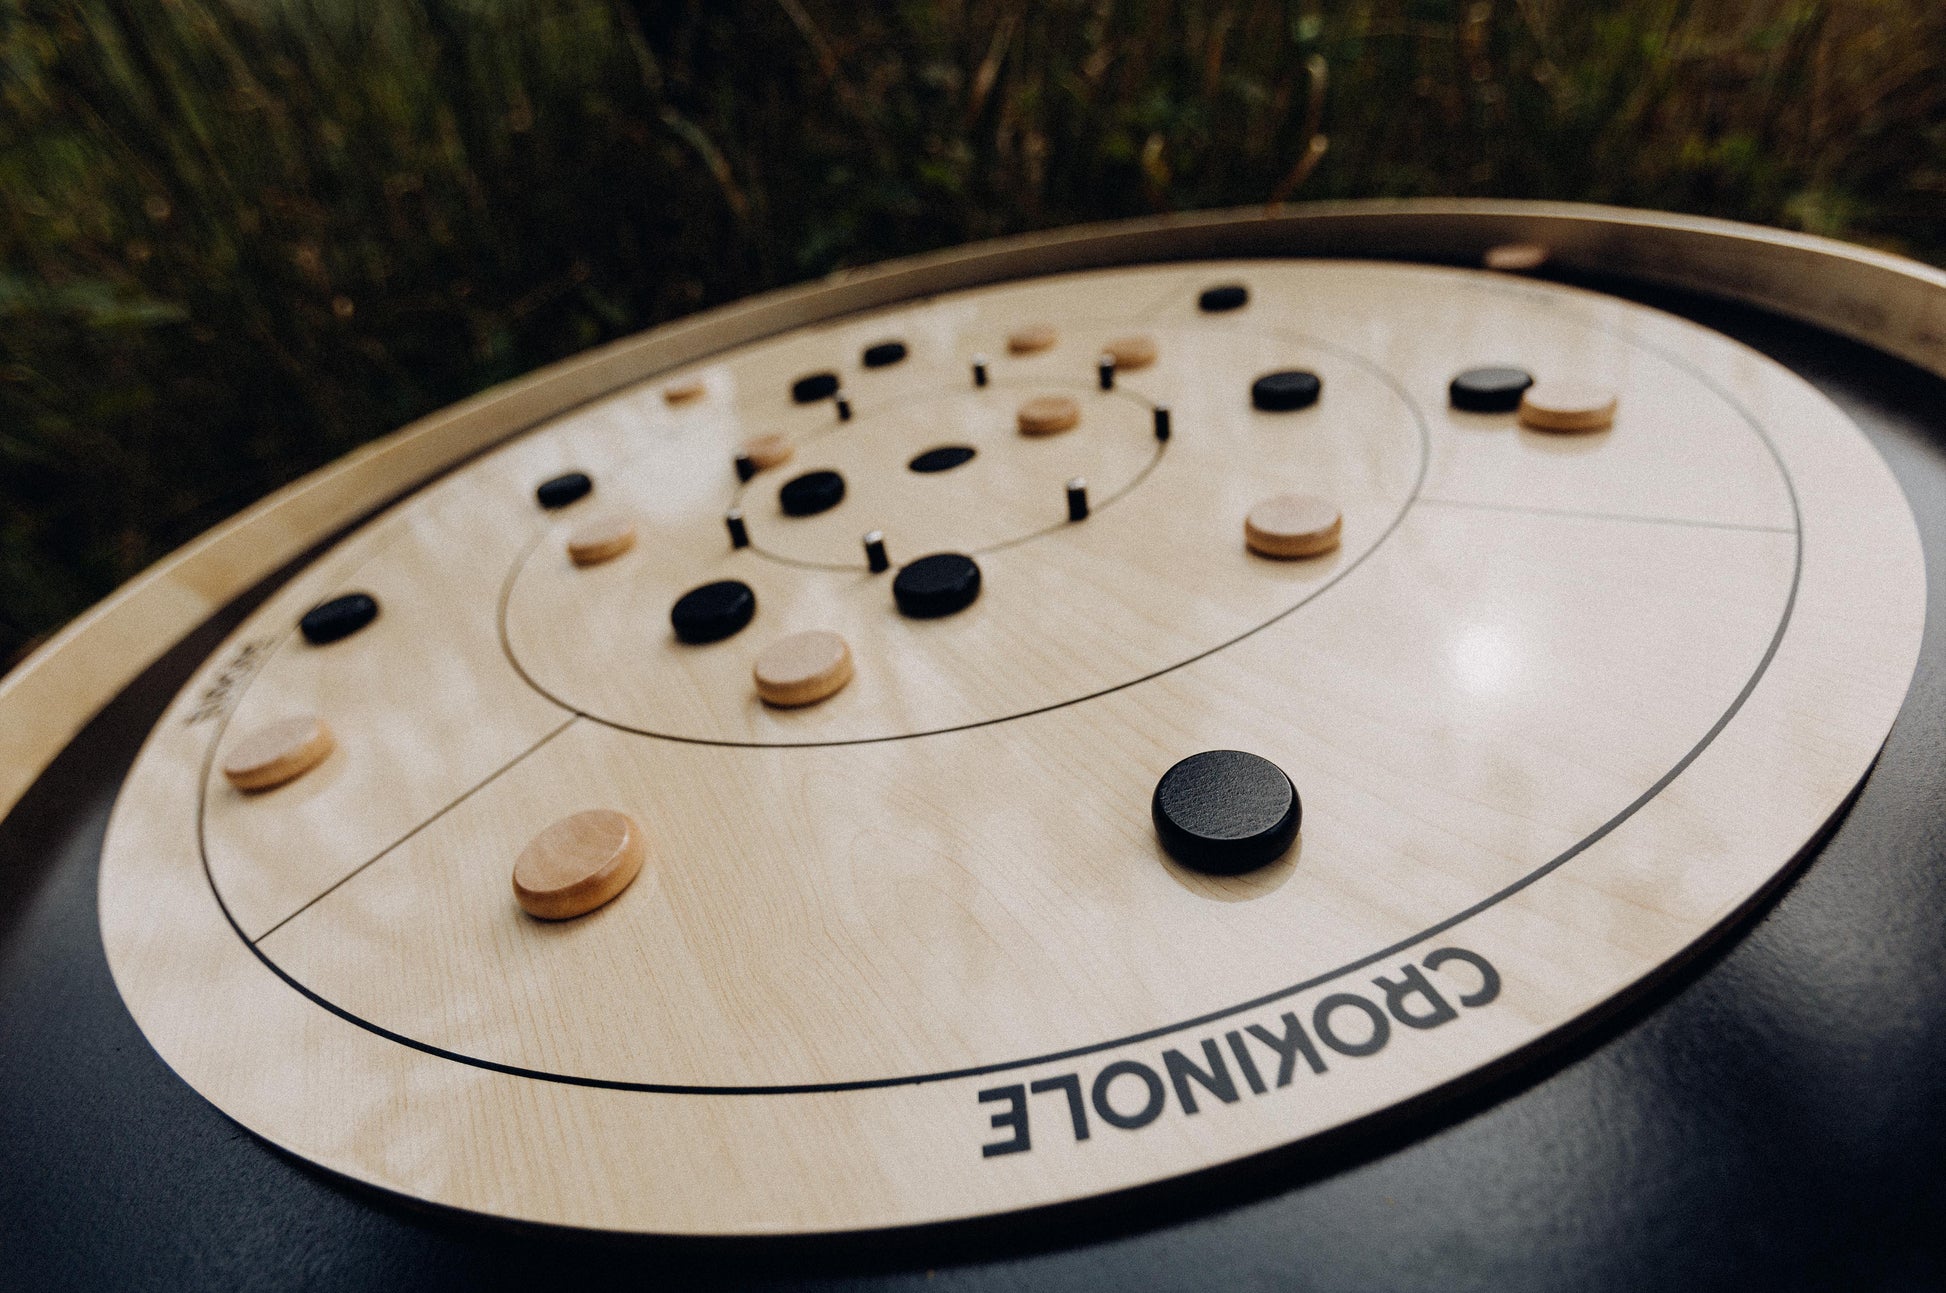 Crokinole Board Game - Tournament Board, Discs, Carrom Powder, Carrying Bag - Official Dimensions - Strategic Game for Young and Old - Buy Crokinole - Crokinole Europe